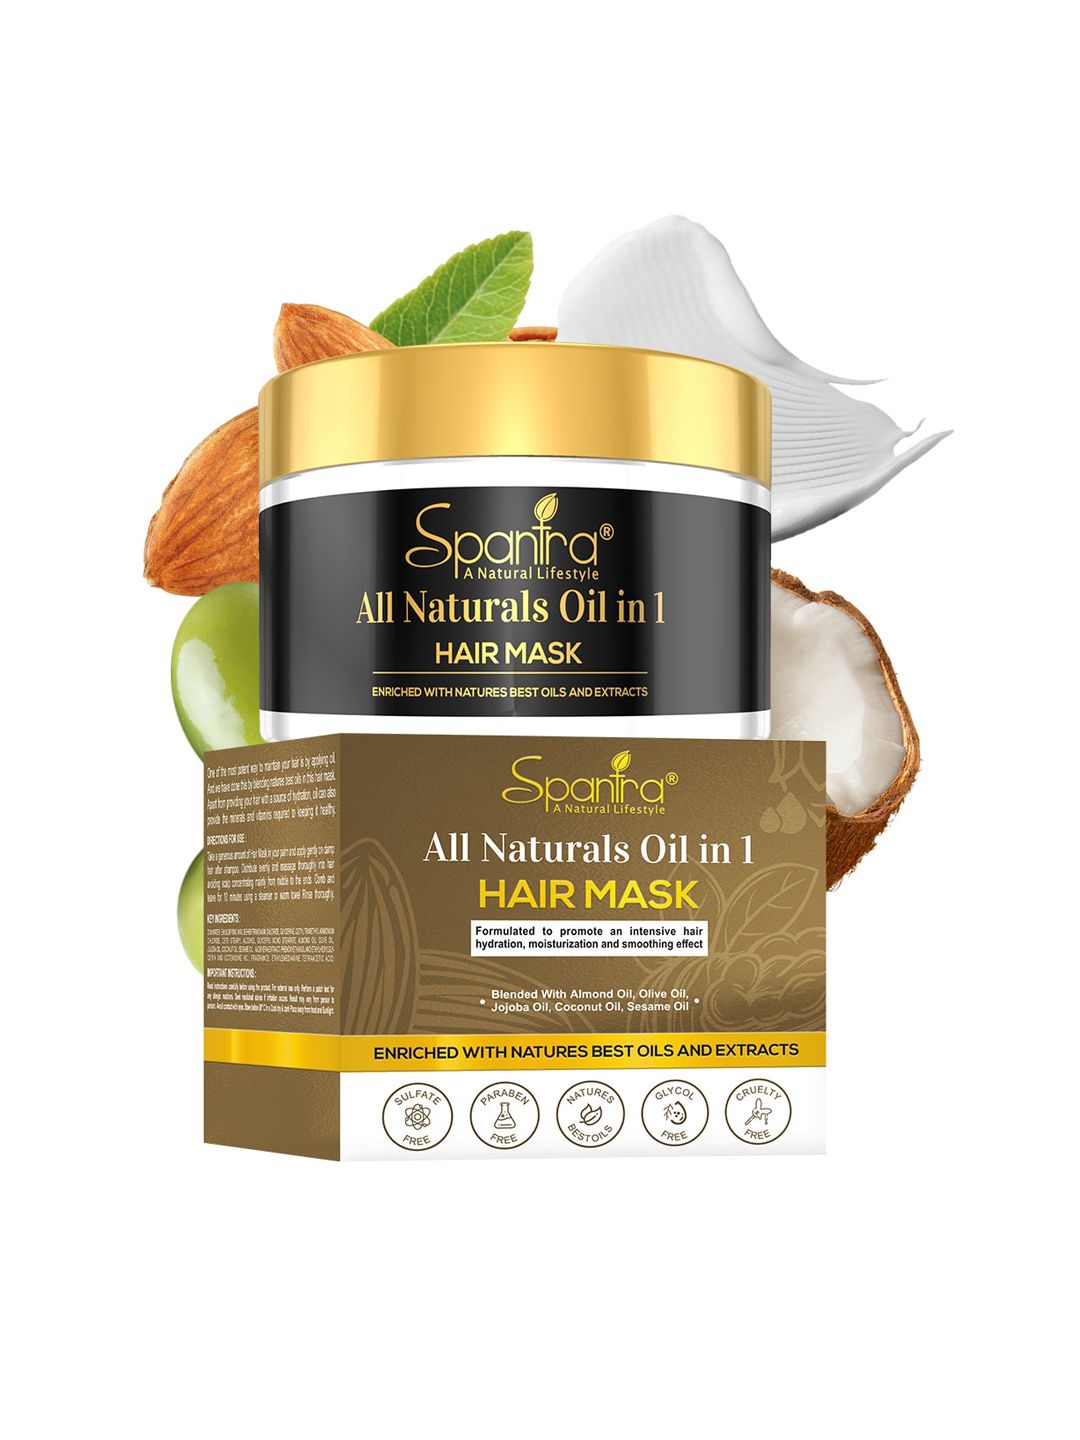 Spantra Women All Naturals Oil in 1 Hair Mask 250g Price in India